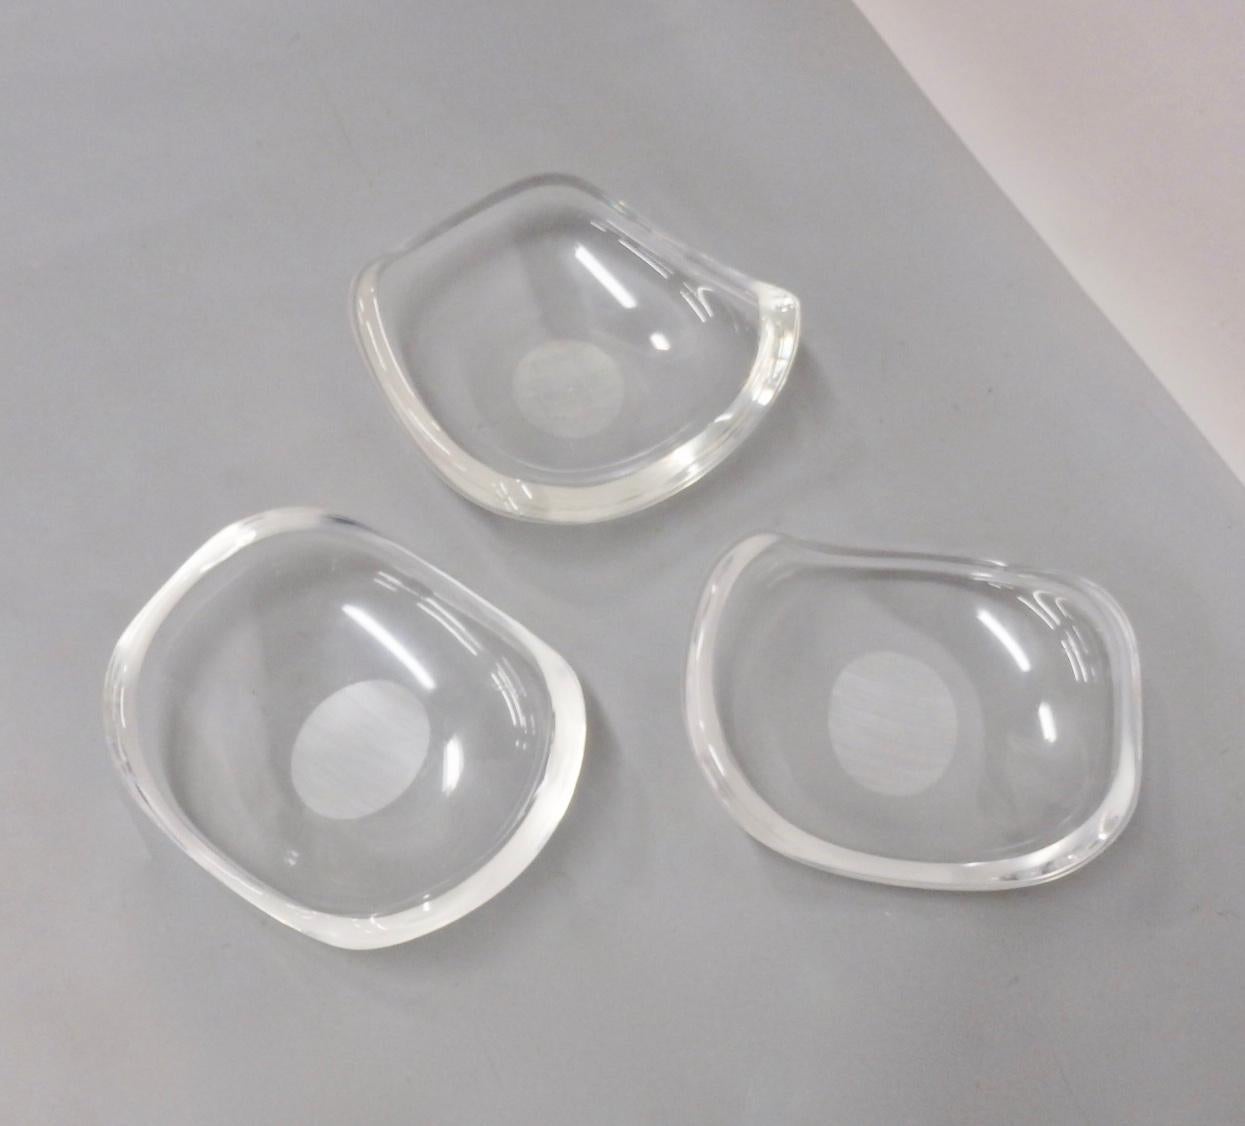 Three Bio Morphic Astrolite Lucite Fruit or Serving Bowls by Ritts For Sale 3